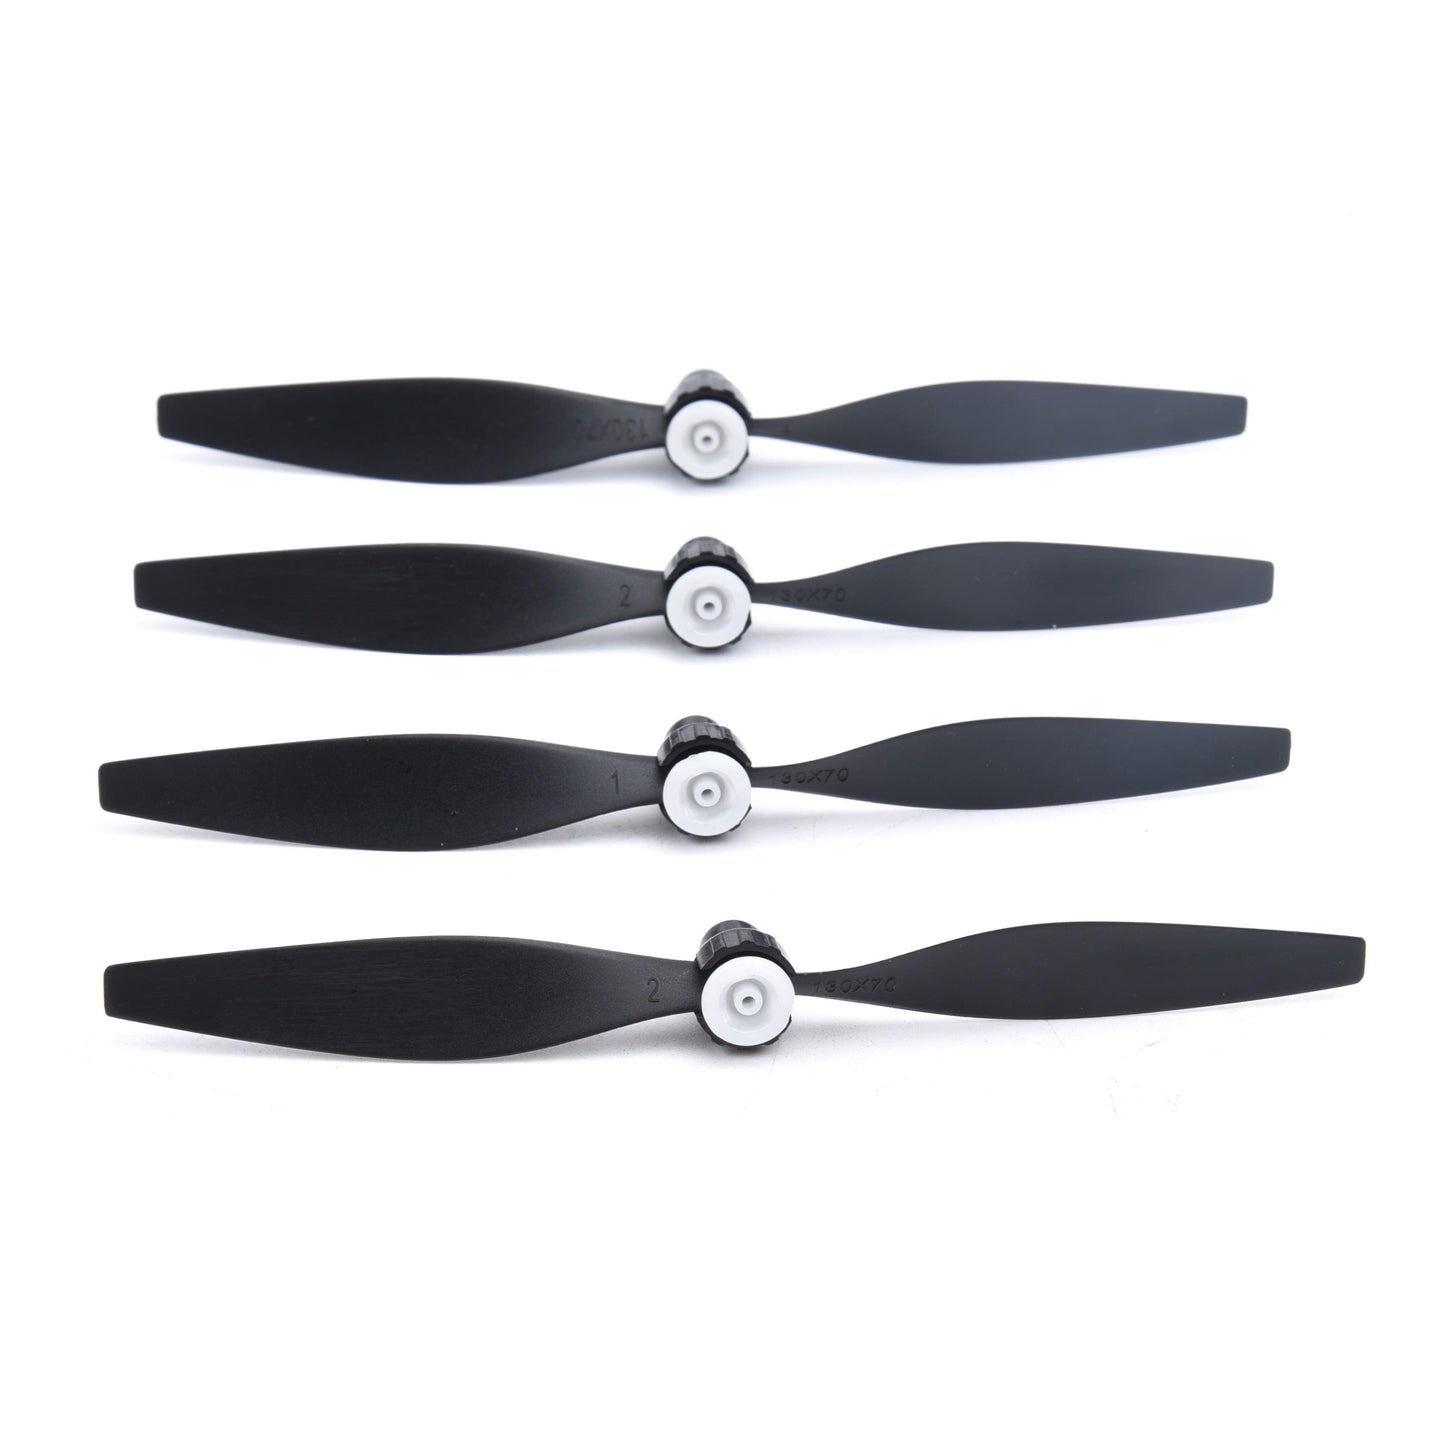 2/4PCs 5.2inch Propeller And Prop Saver Set - For VOLANTEXRC 761-8 F4U Corsair / 761-9 T28 Airplane Air Plane Spare Parts Hot Sale - RCDrone